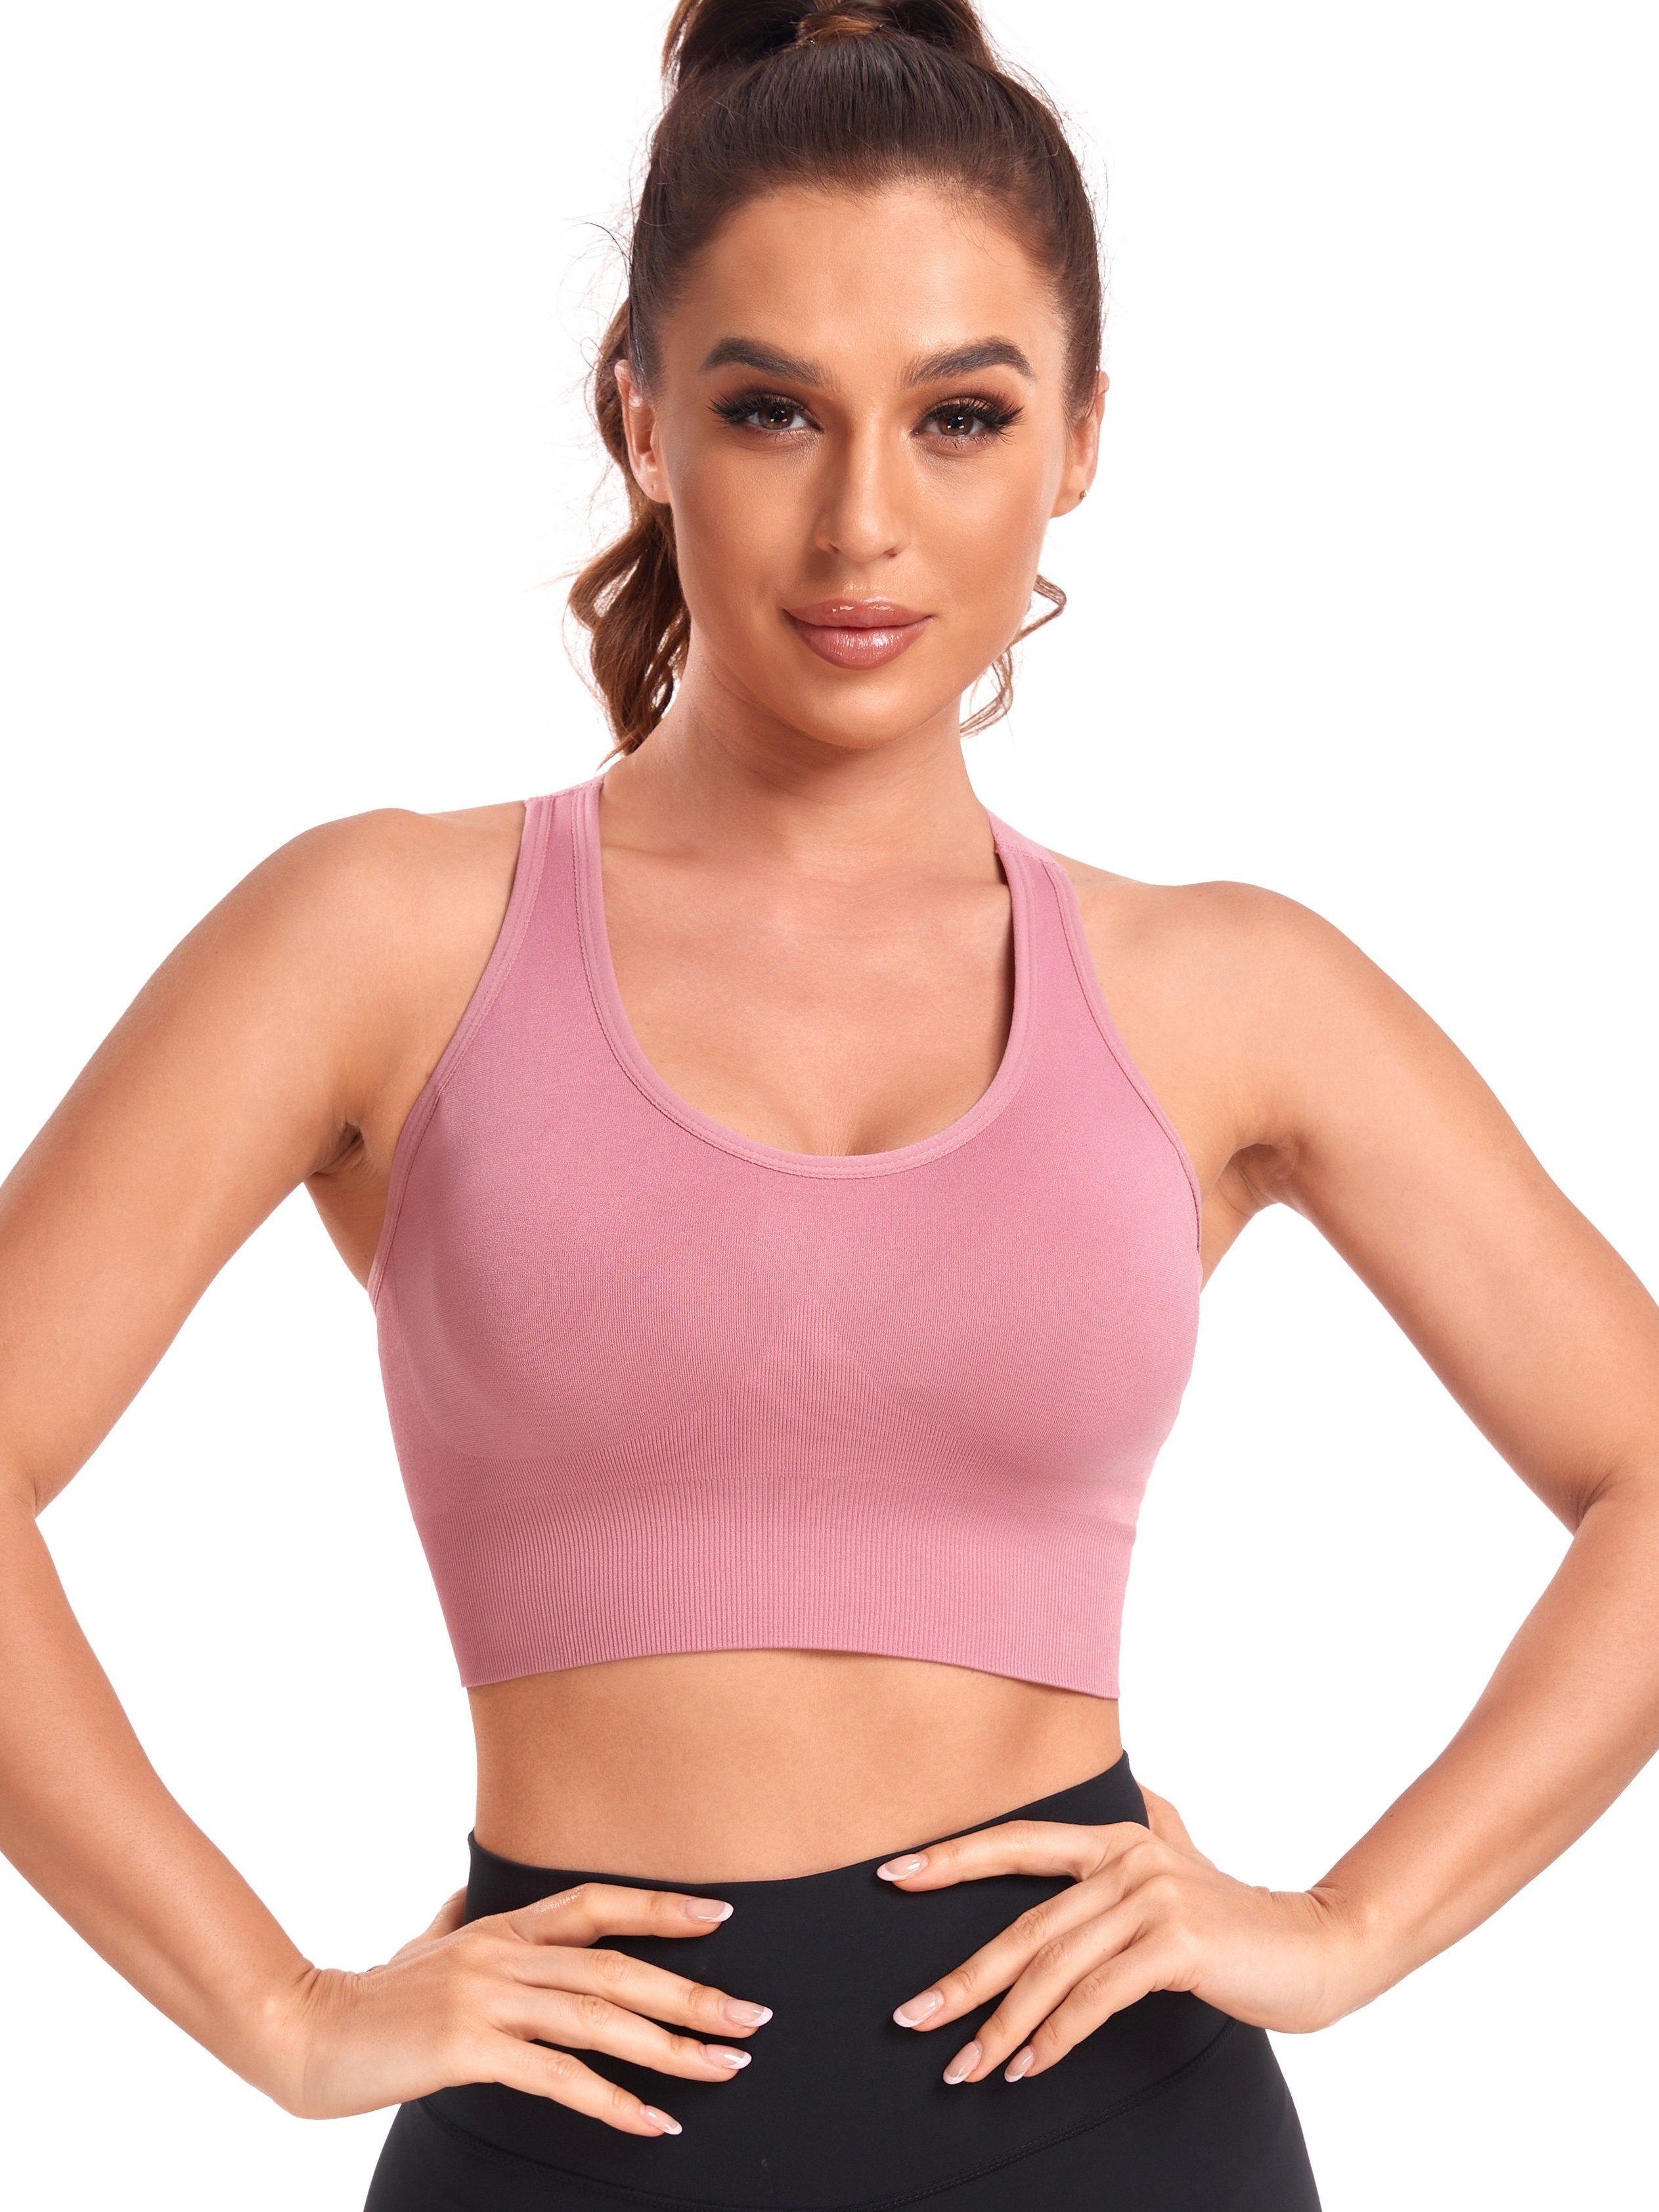 Ladies Sports Top Fitness Wear Gym Wear Yoga Wear Active Wear and